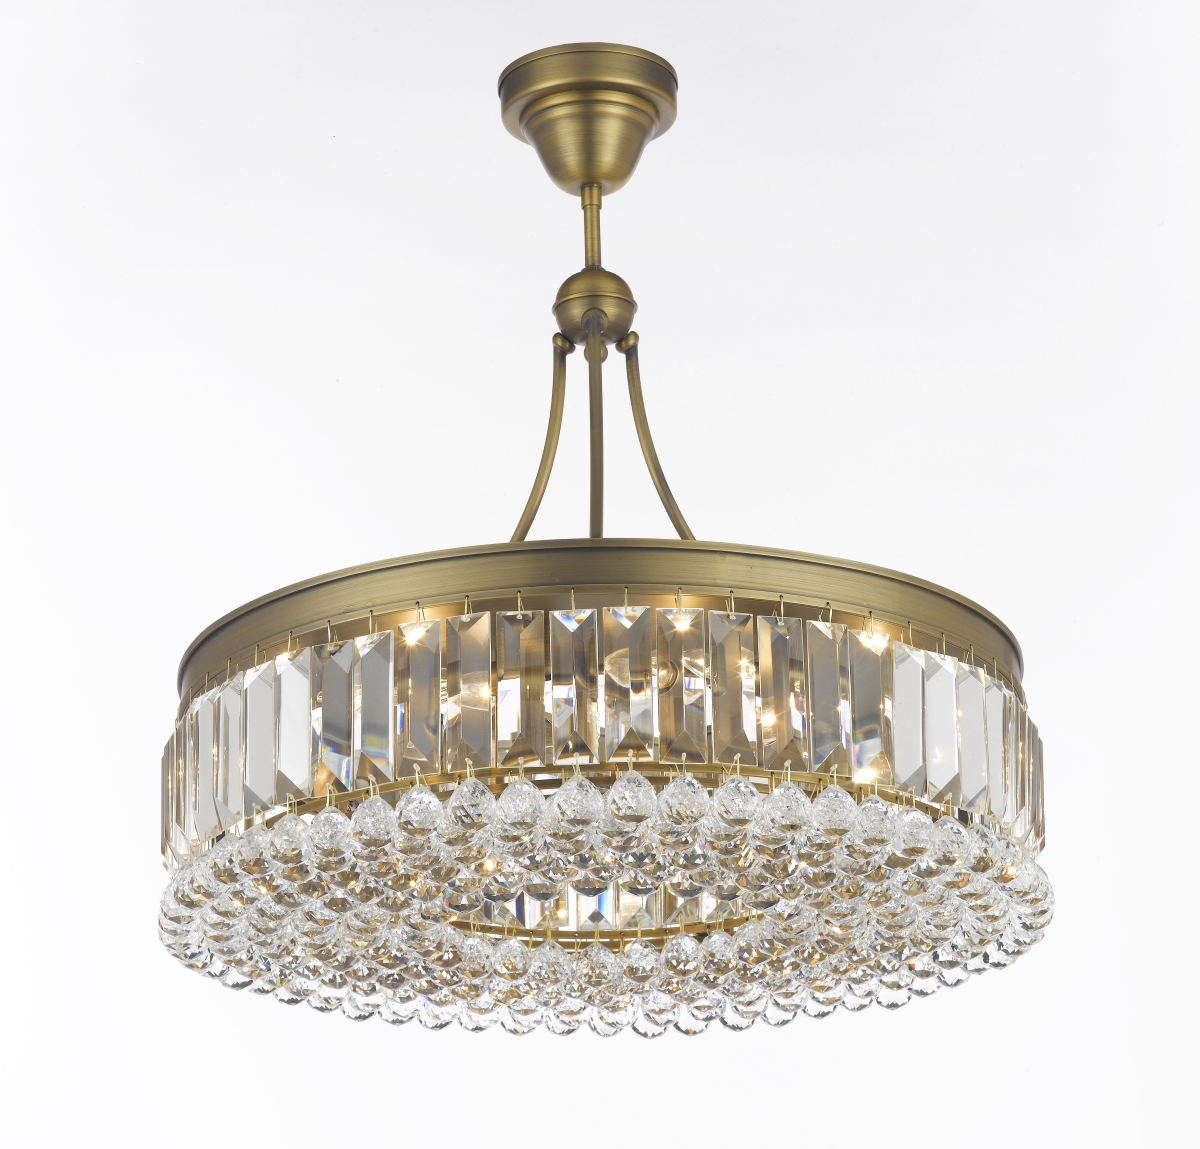 Pwg Lighting 2901-24-ag 24 In. Valencia Hanging Chandelier With Heirloom Grandcut Crystals - Antique Gold